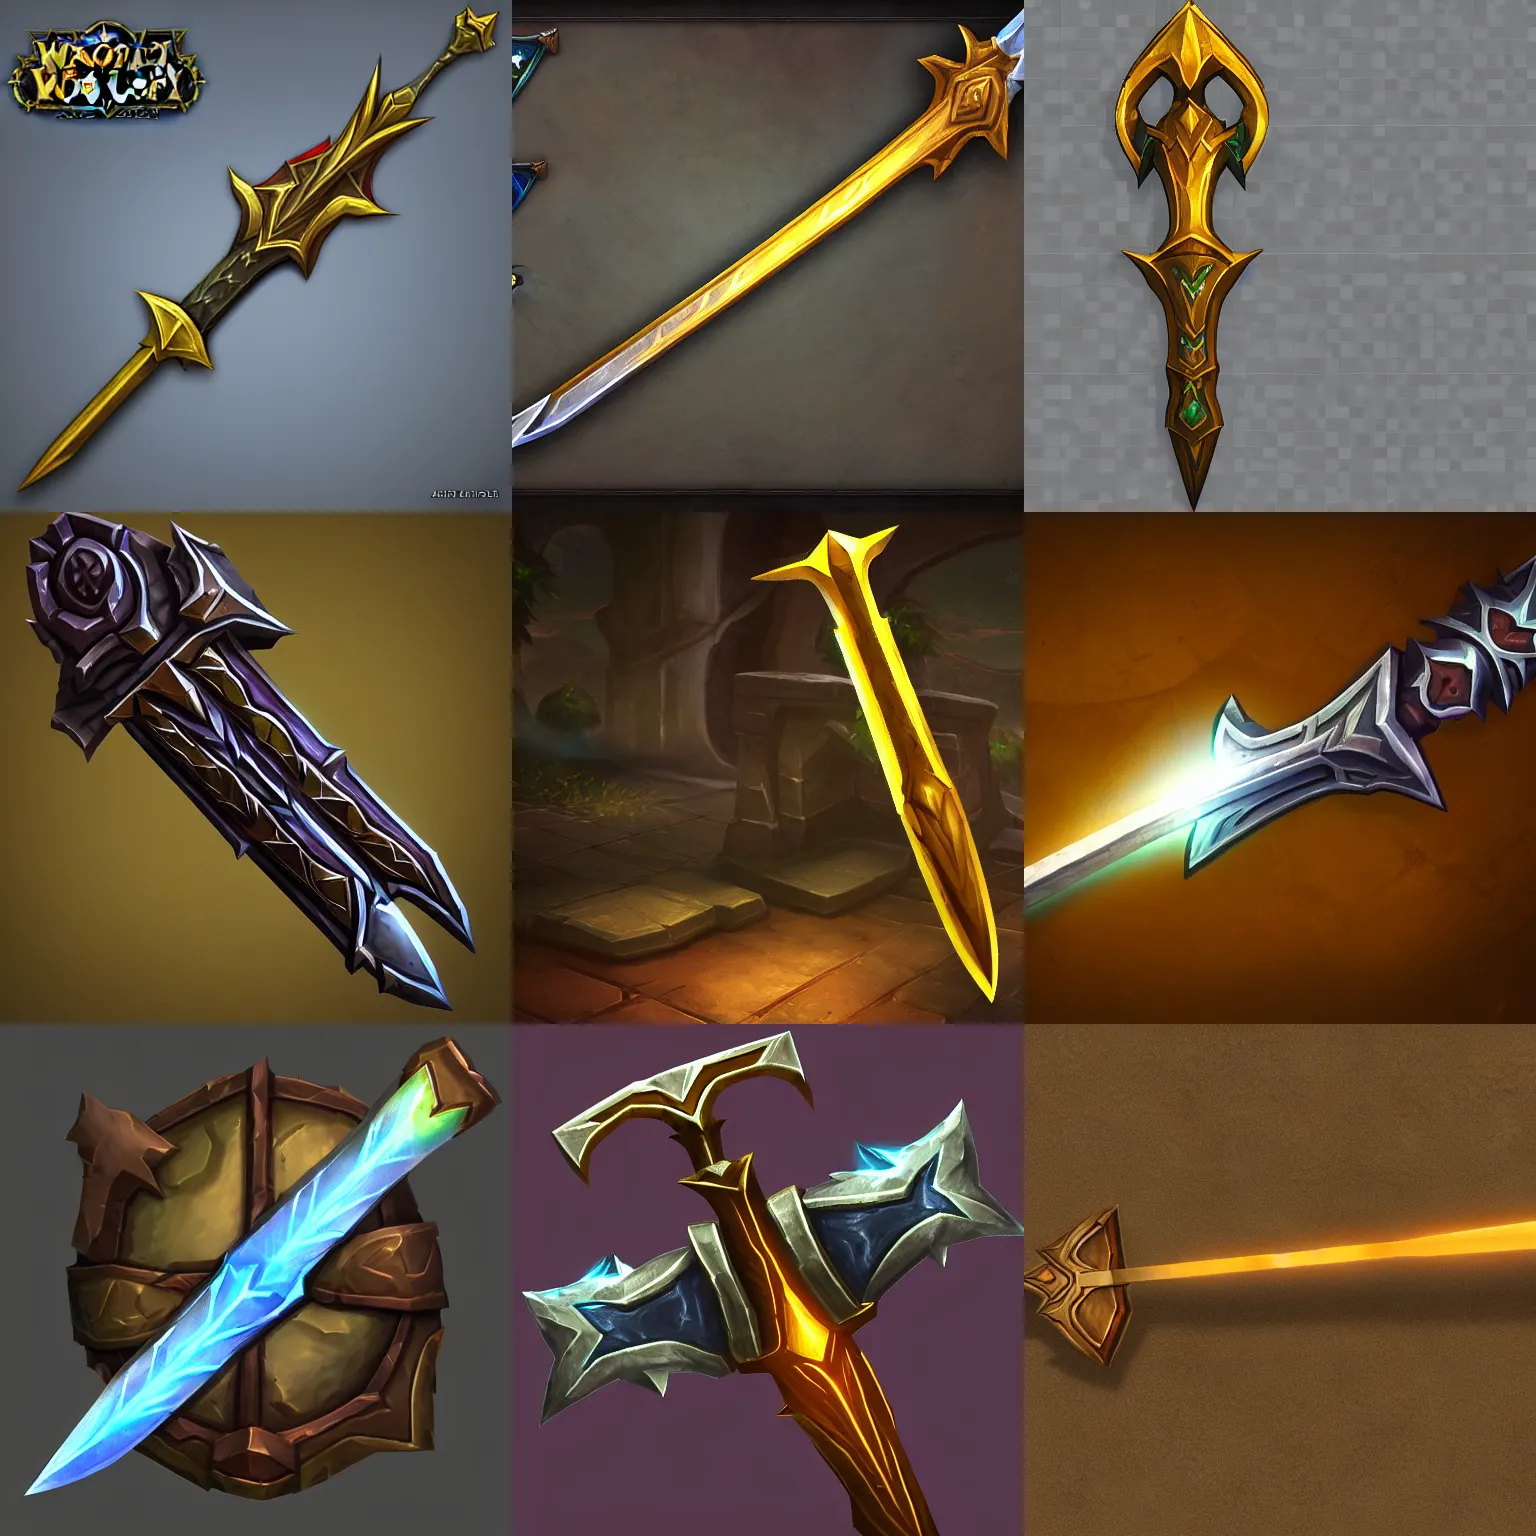 Taking Inventory: Sword